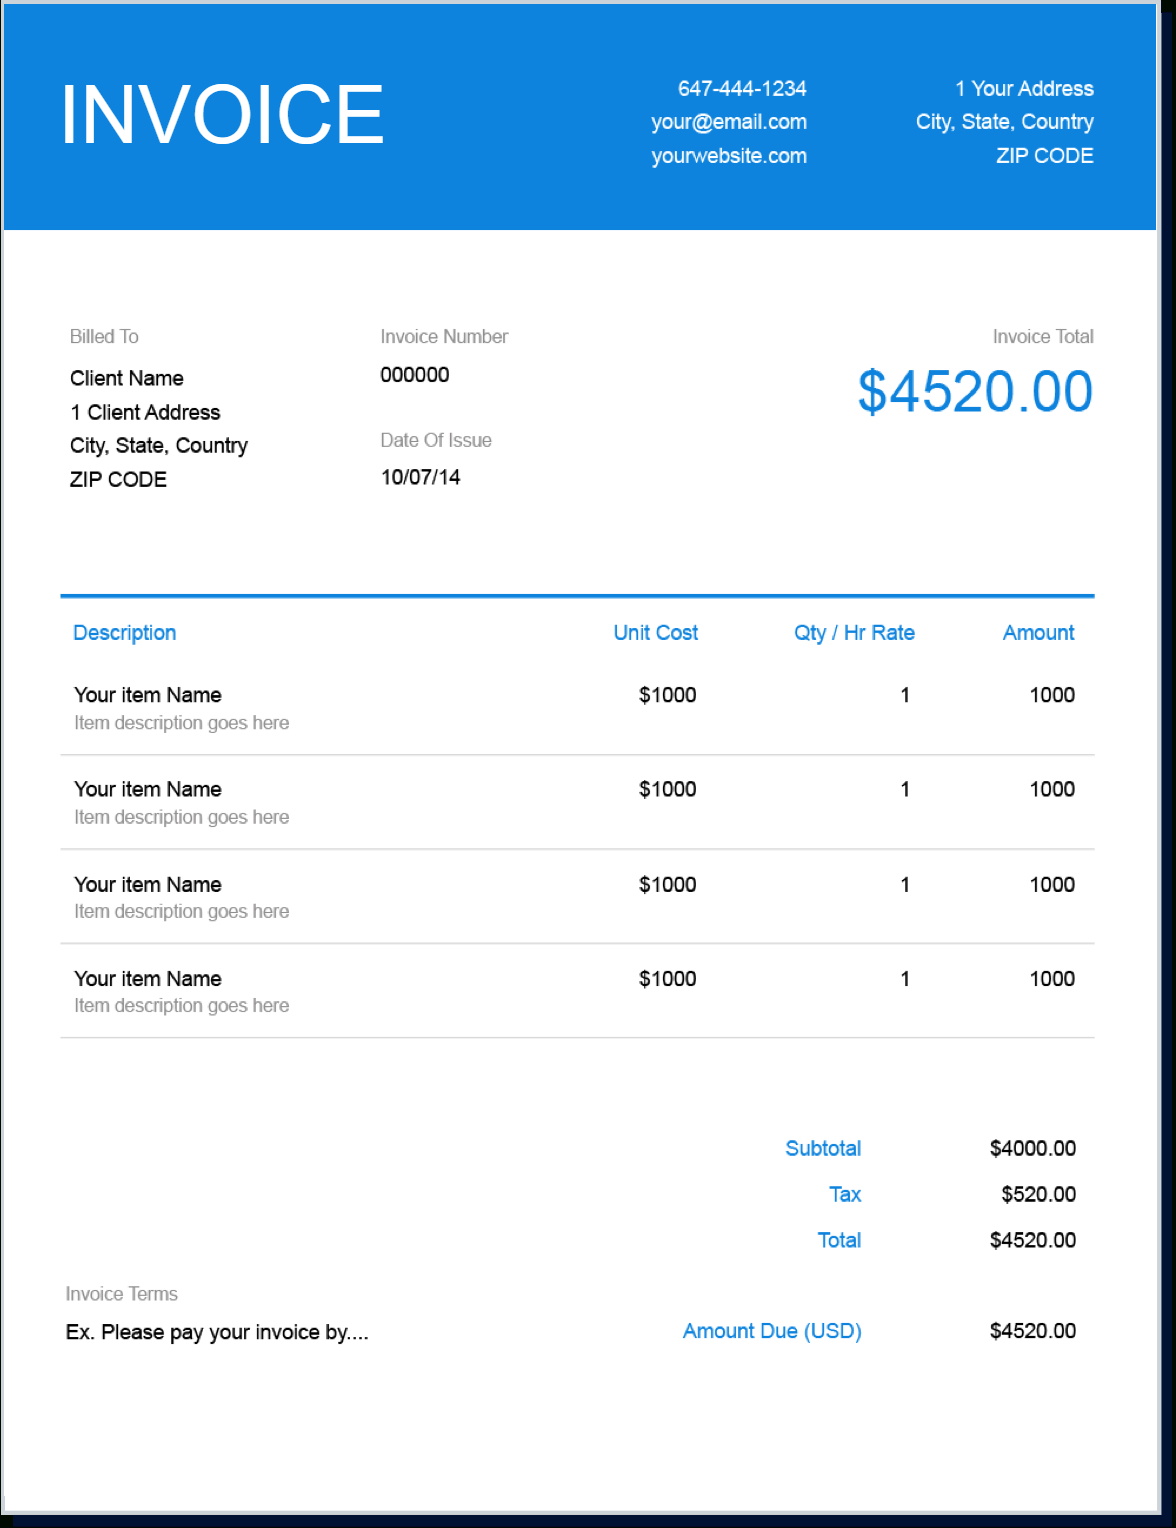 Invoice Template | Create And Send Free Invoices Instantly For Make Your Own Invoice Template Free